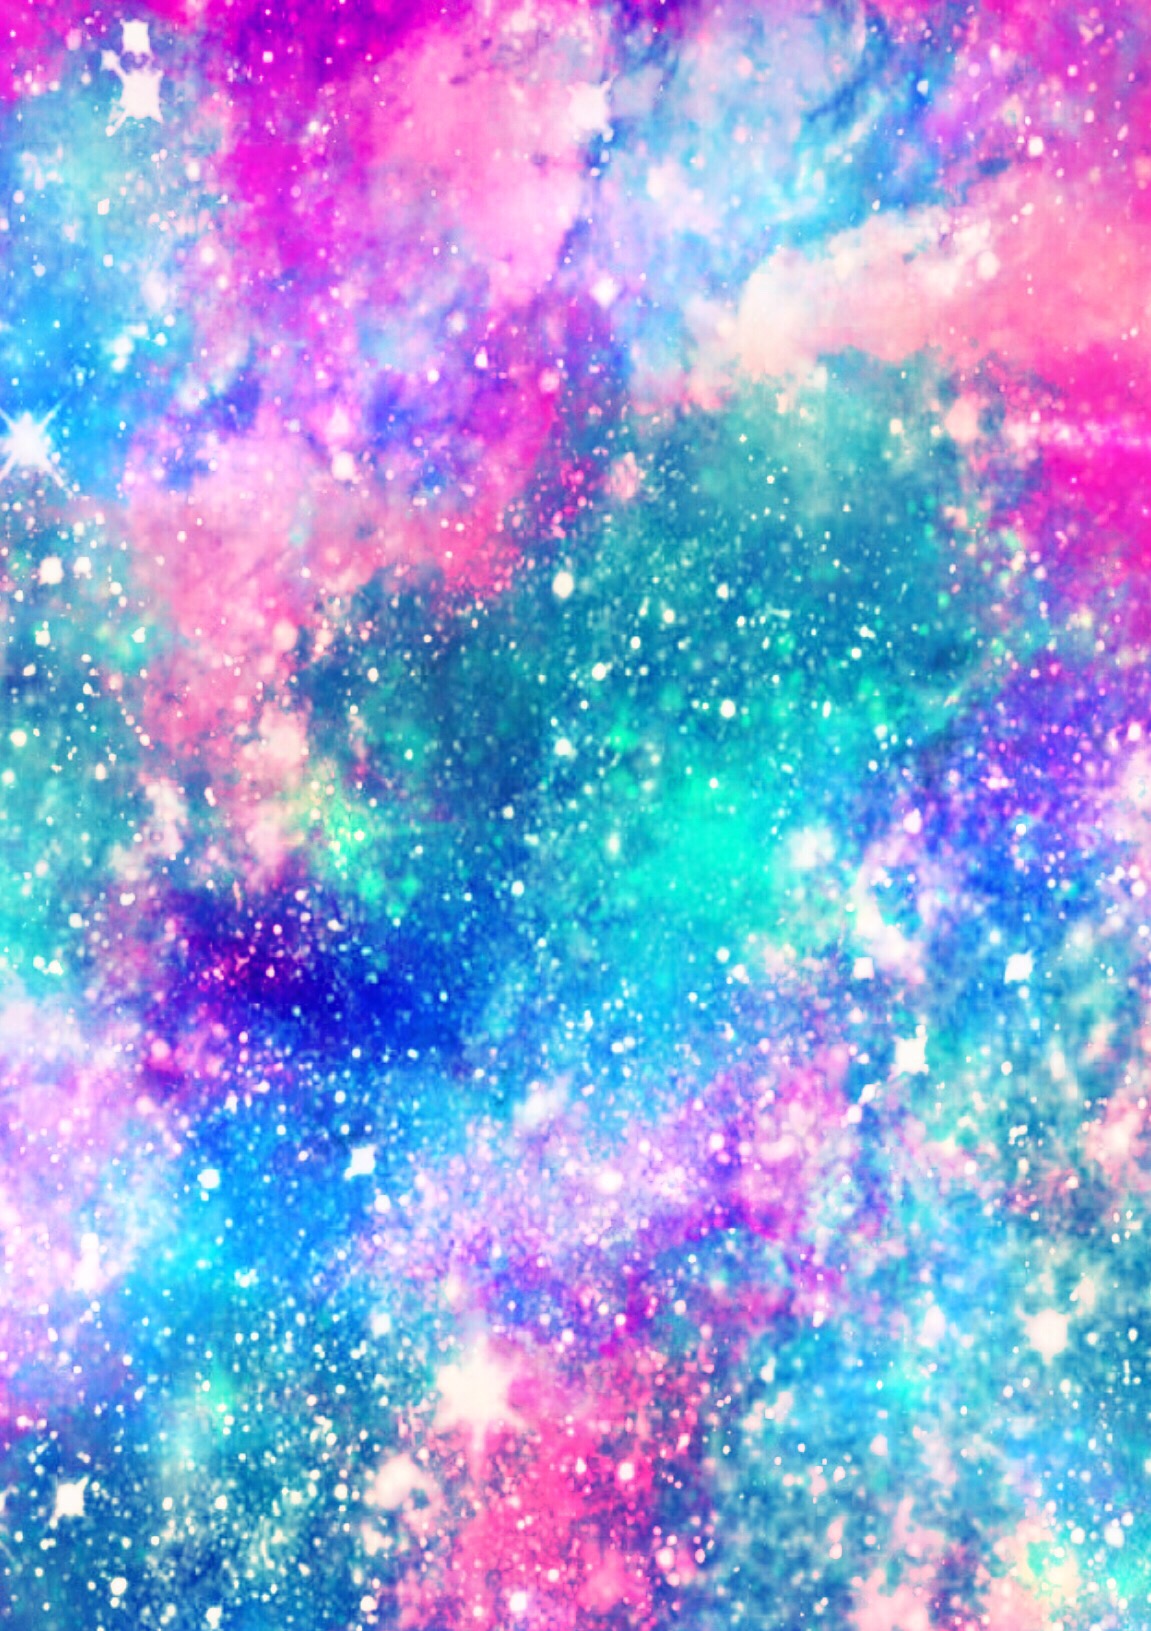 freetoedit glitter sparkle galaxy pastel pink blue purp...
 Pink And Blue Sparkle Background